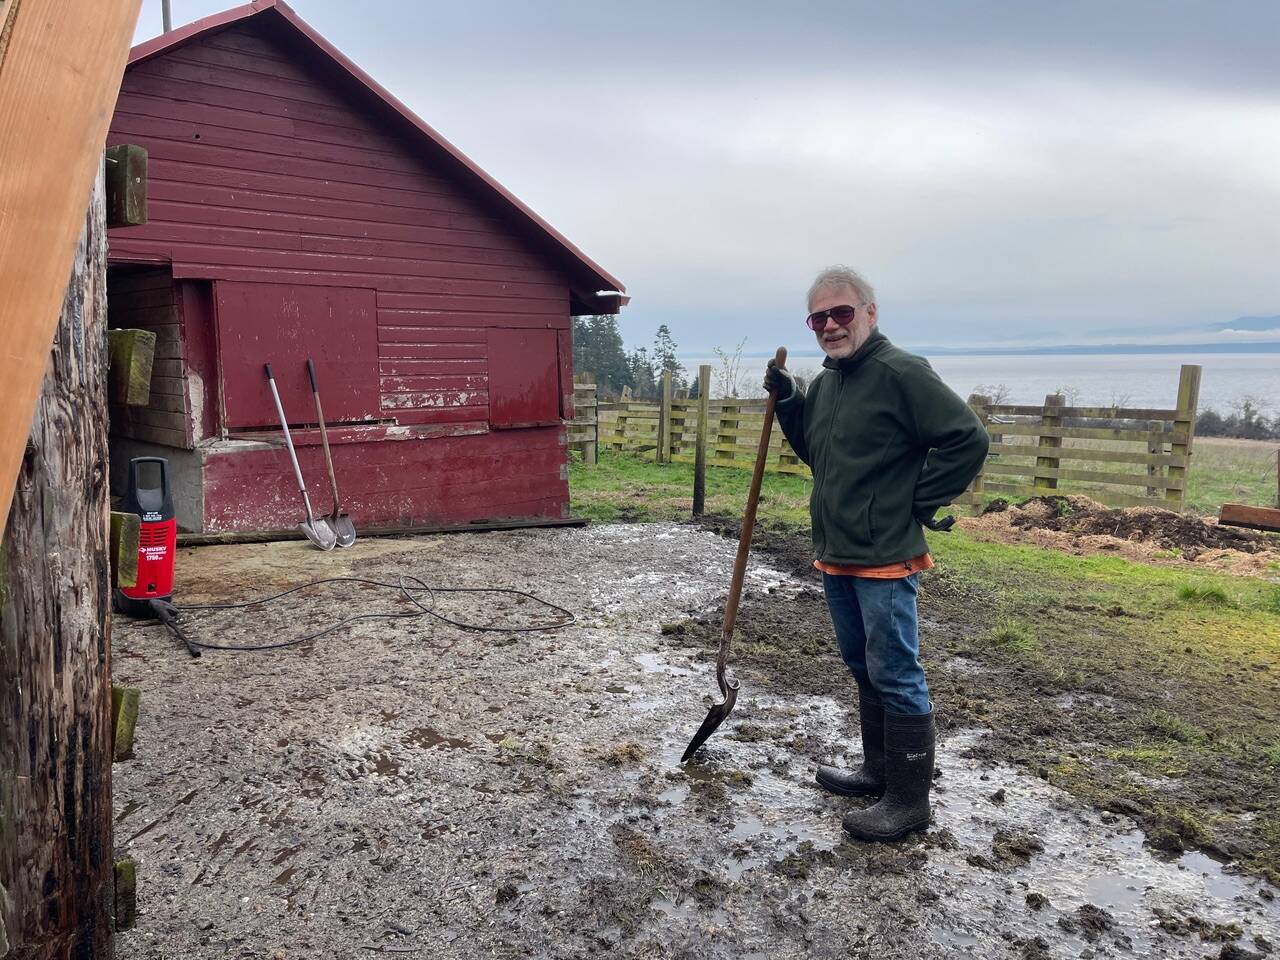 John Cordell takes a moment to appreciate the difference he and his pressure washer made on what was a completely moss- and grass-covered concrete pad. (Photo provided)